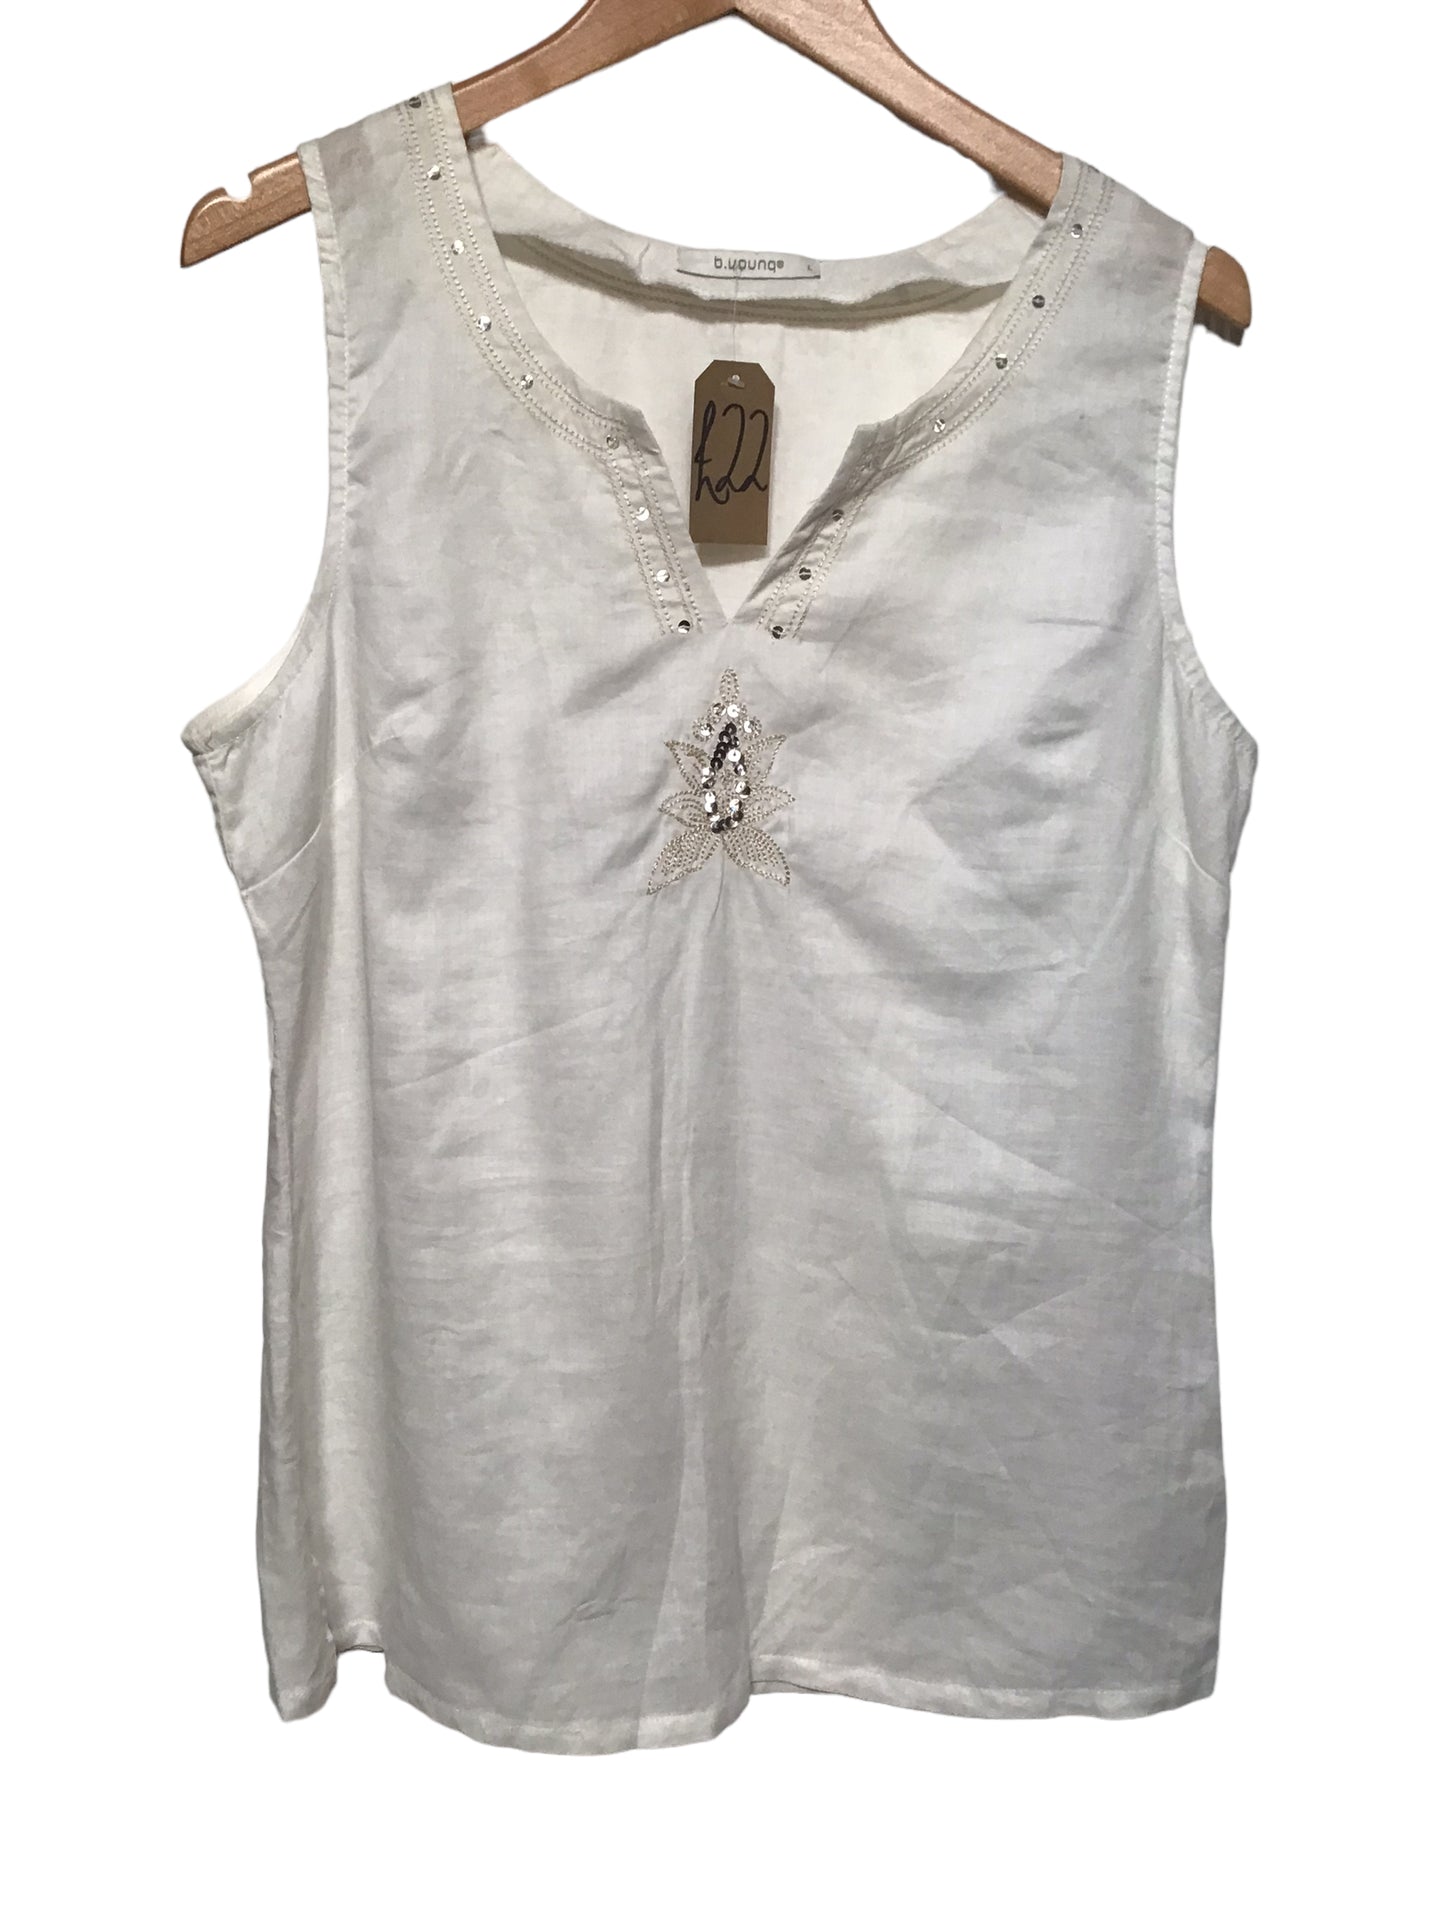 B.Young Sleeveless Top (Size L)